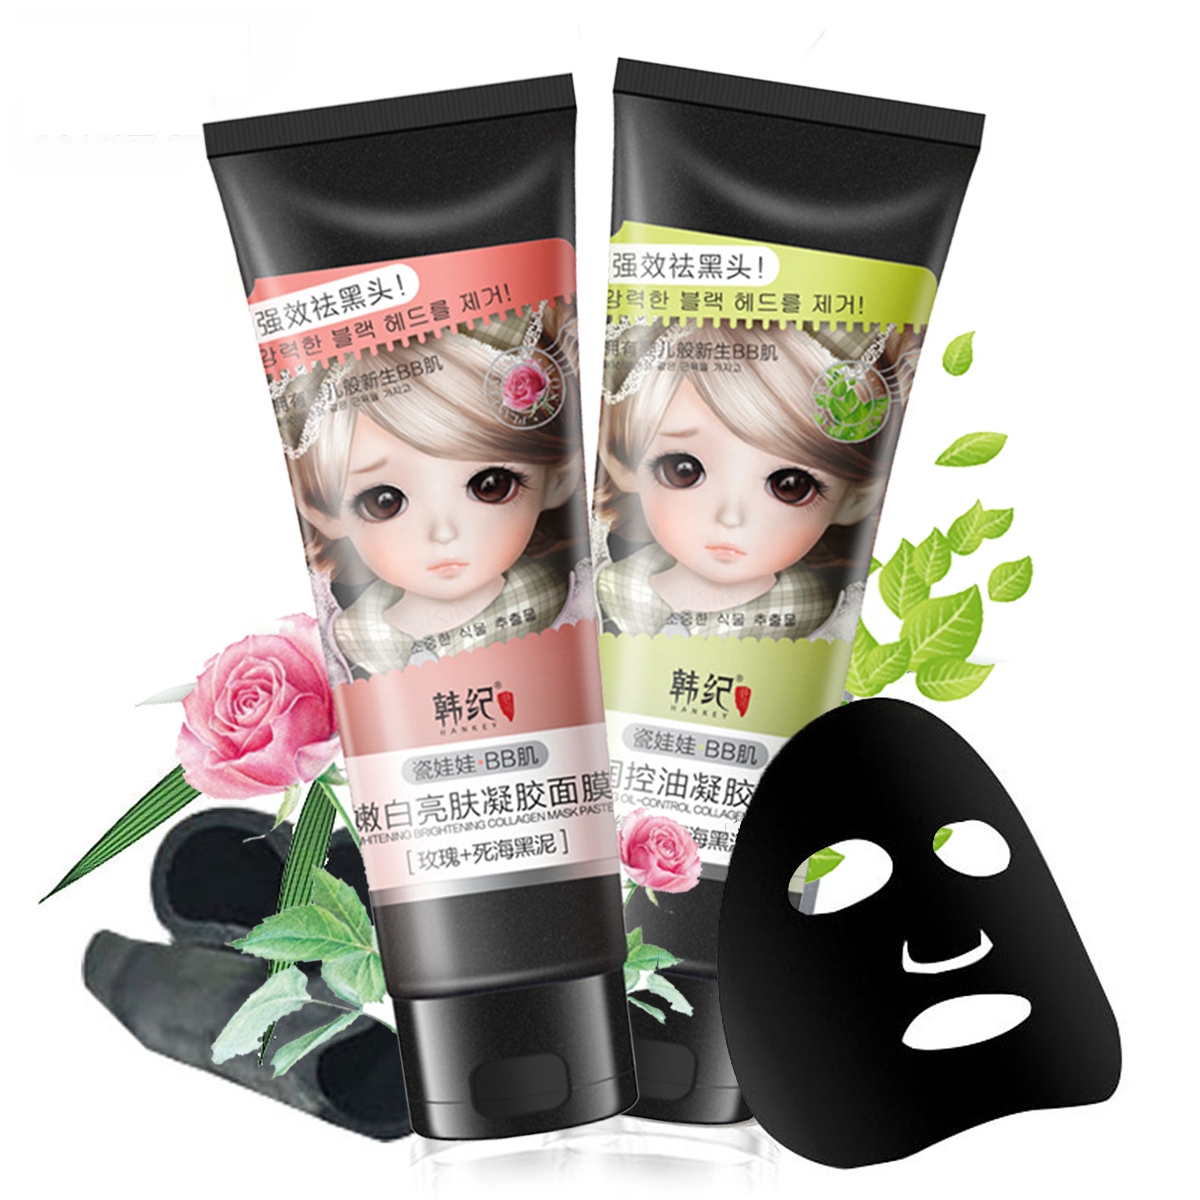 

Dead Sea Mud Blackhead Remover Mask Black Purifying Face Deep Cleansing Peel Off Acne Pore Whiten